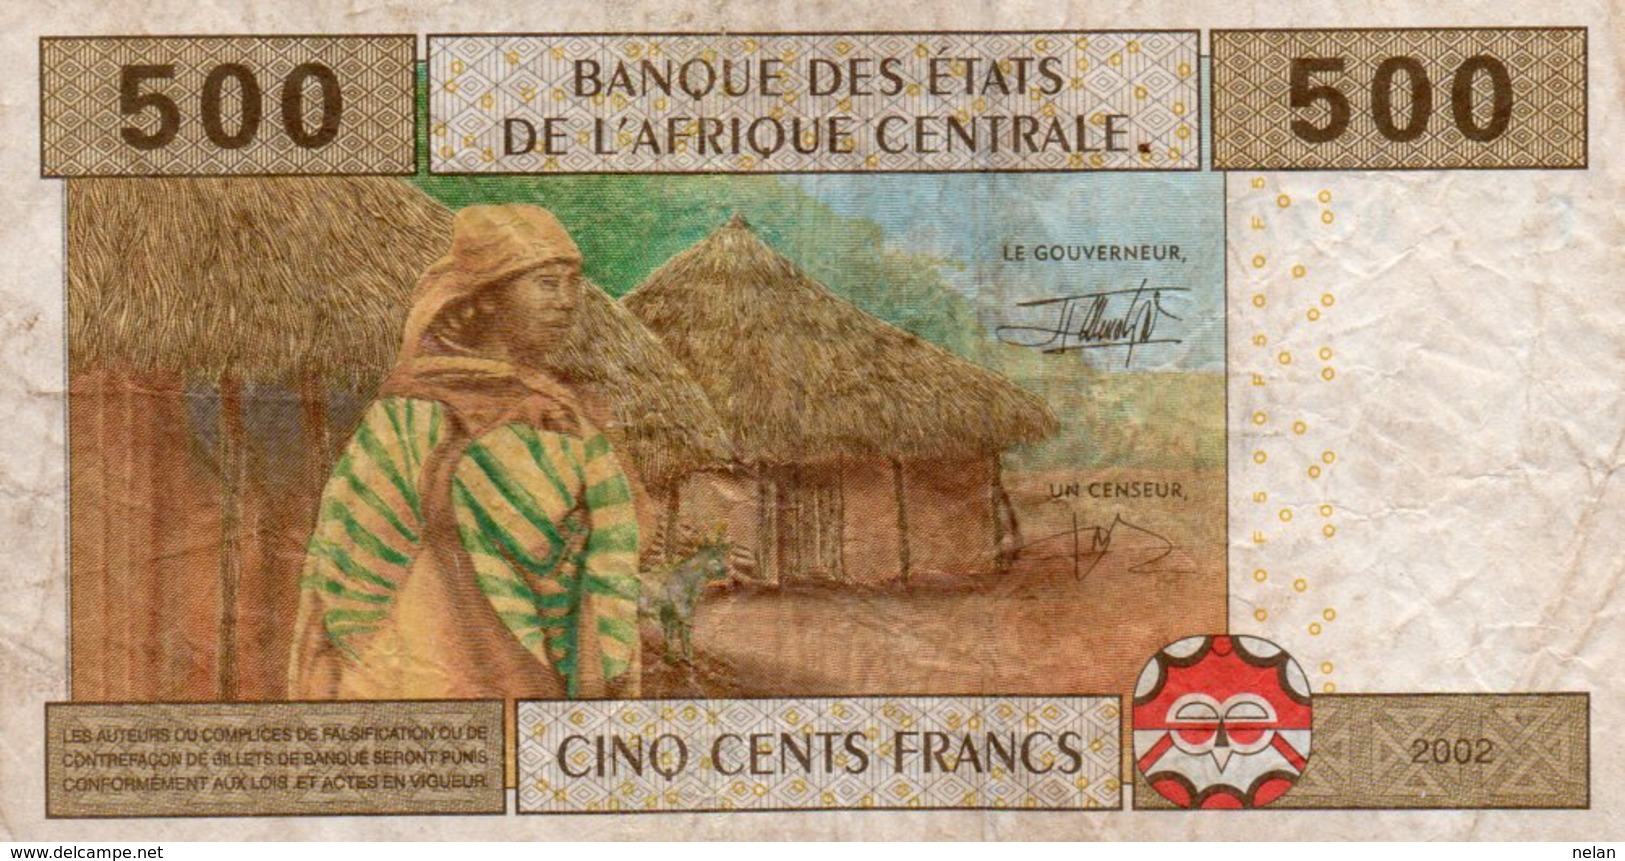 CENTRAL AFRICAN STATES 500 FRANCS 2002 P-506 Fa F For Equatorial Guinea  CIRC. - Zentralafrikanische Staaten